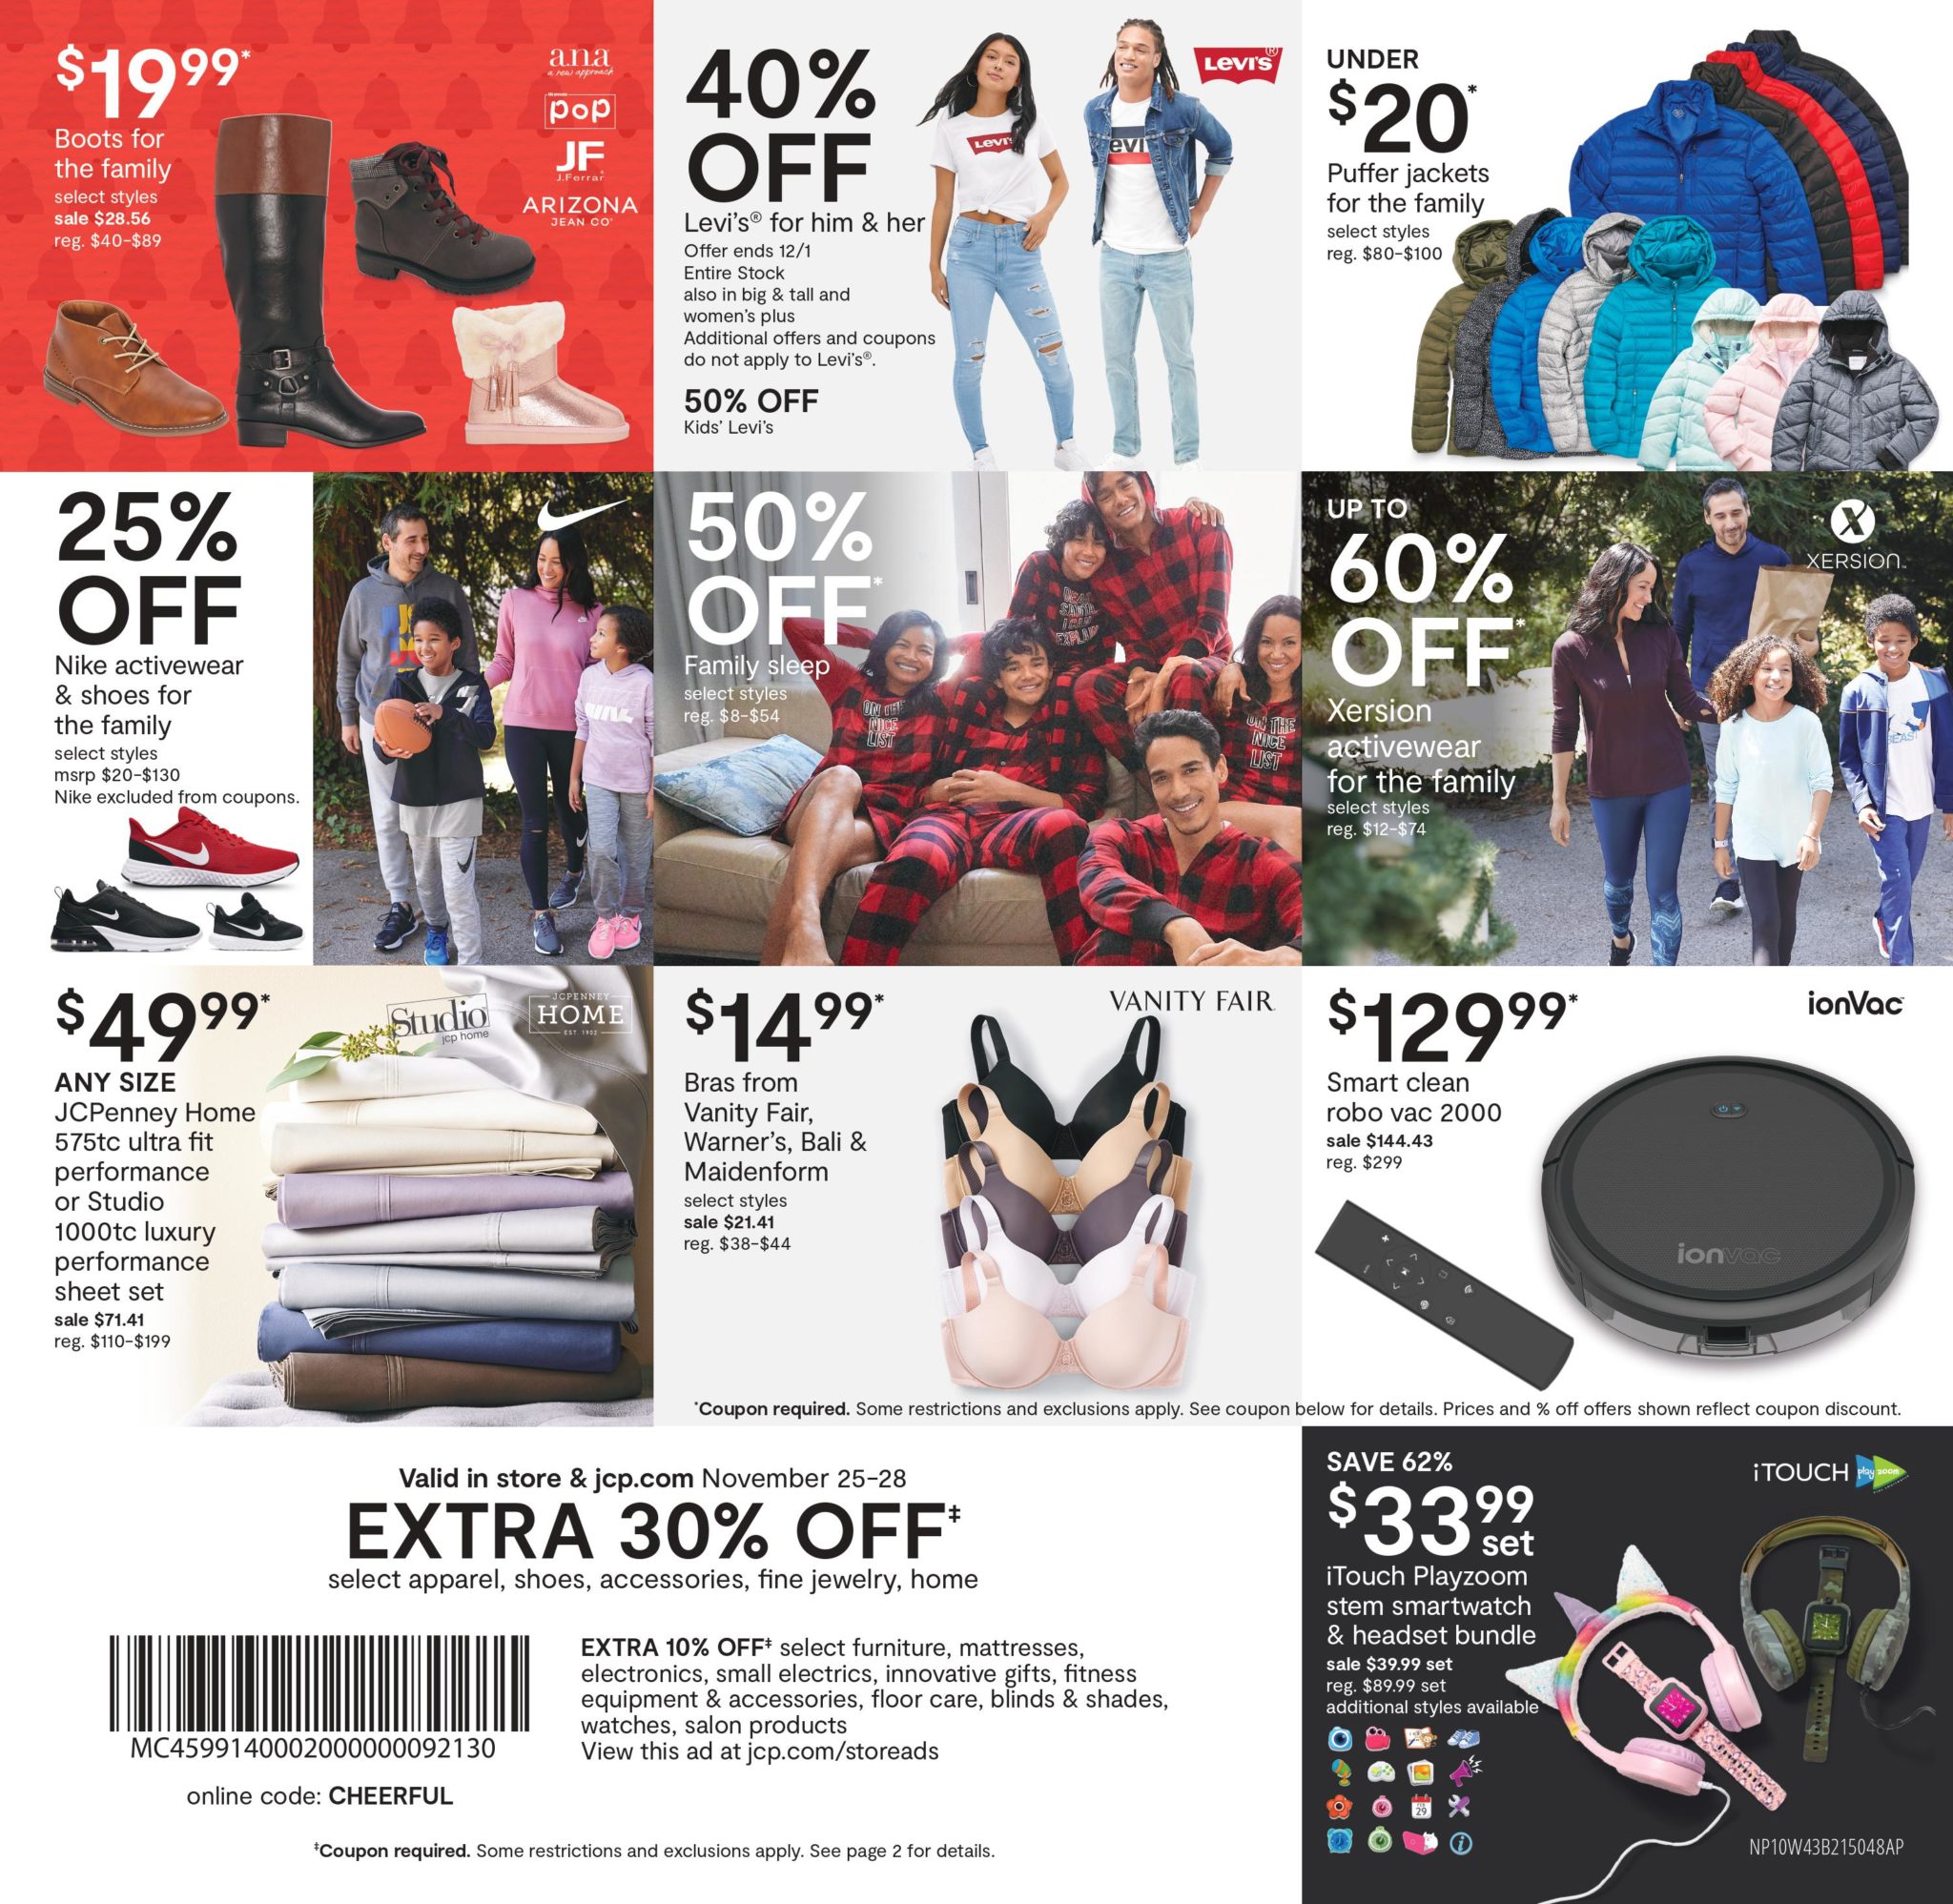 JCPenney Black Friday Ad Sale 2021 - What Is Anthropologie Black Friday 2021 Deals